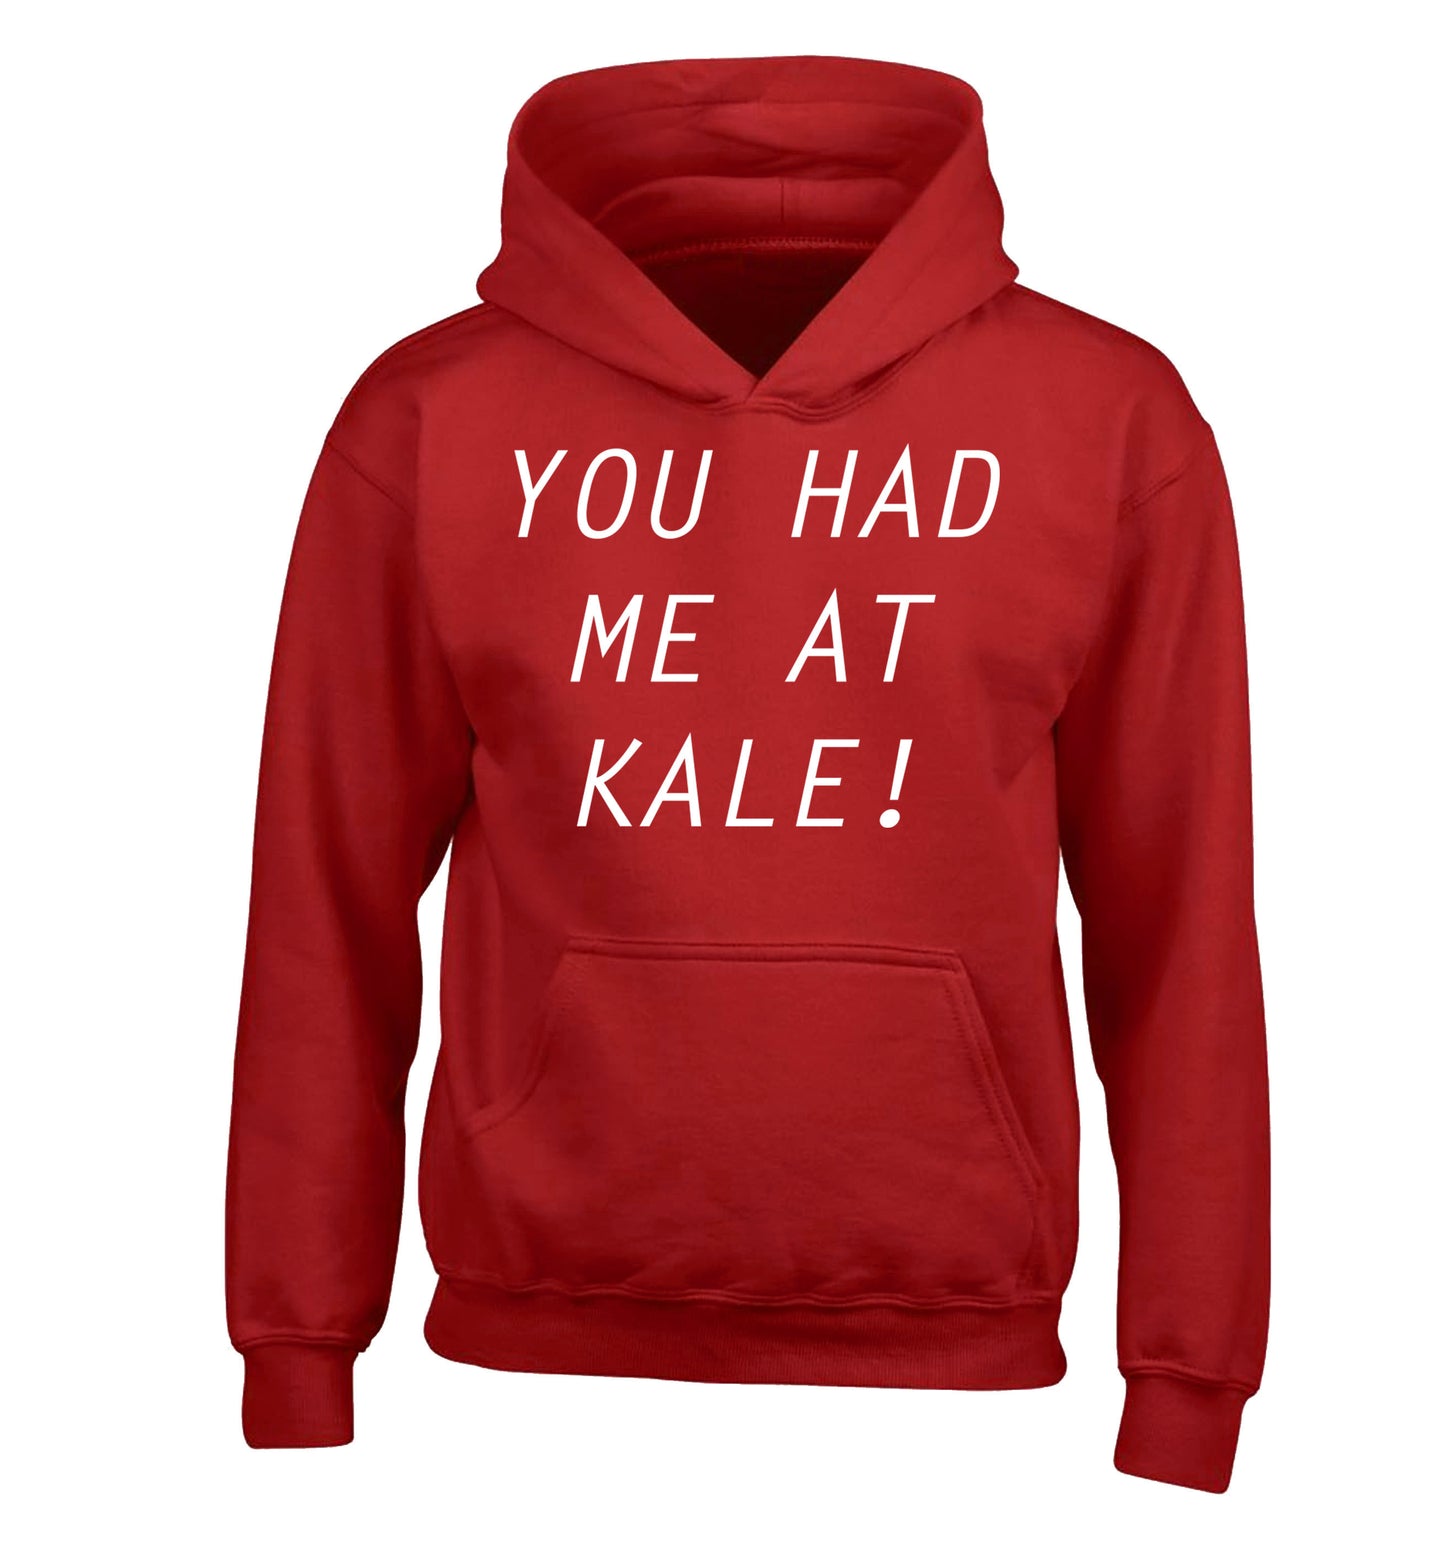 You had me at kale children's red hoodie 12-14 Years